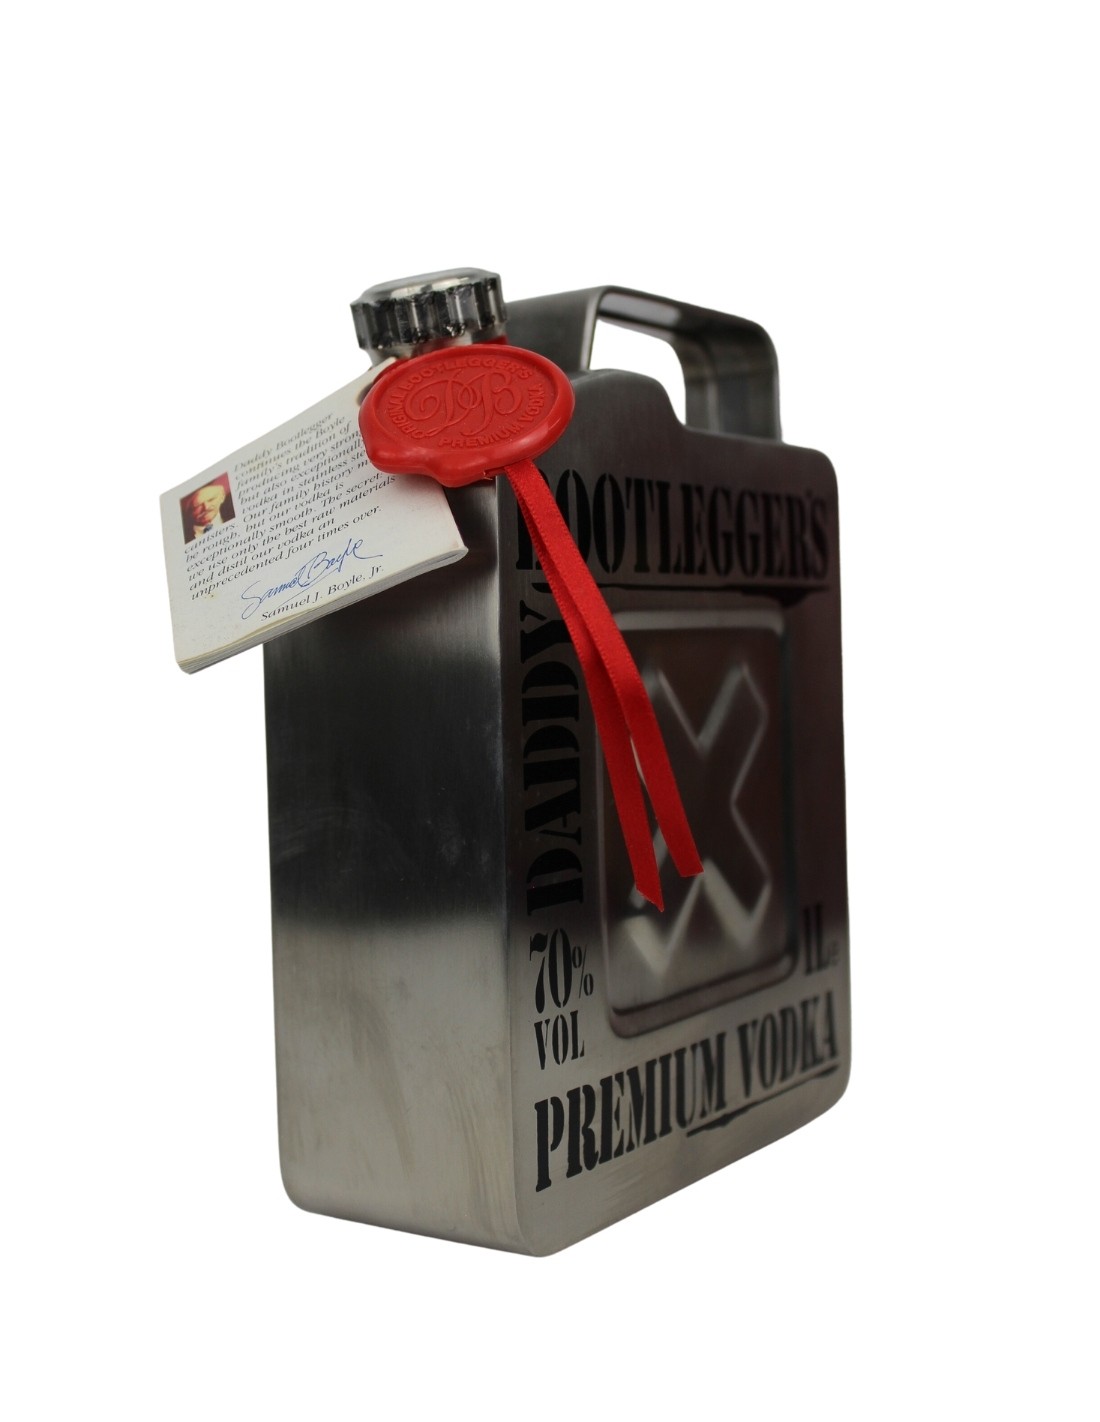 Daddy Bootlegger's Premium Vodka in hand-made stainless steel canister